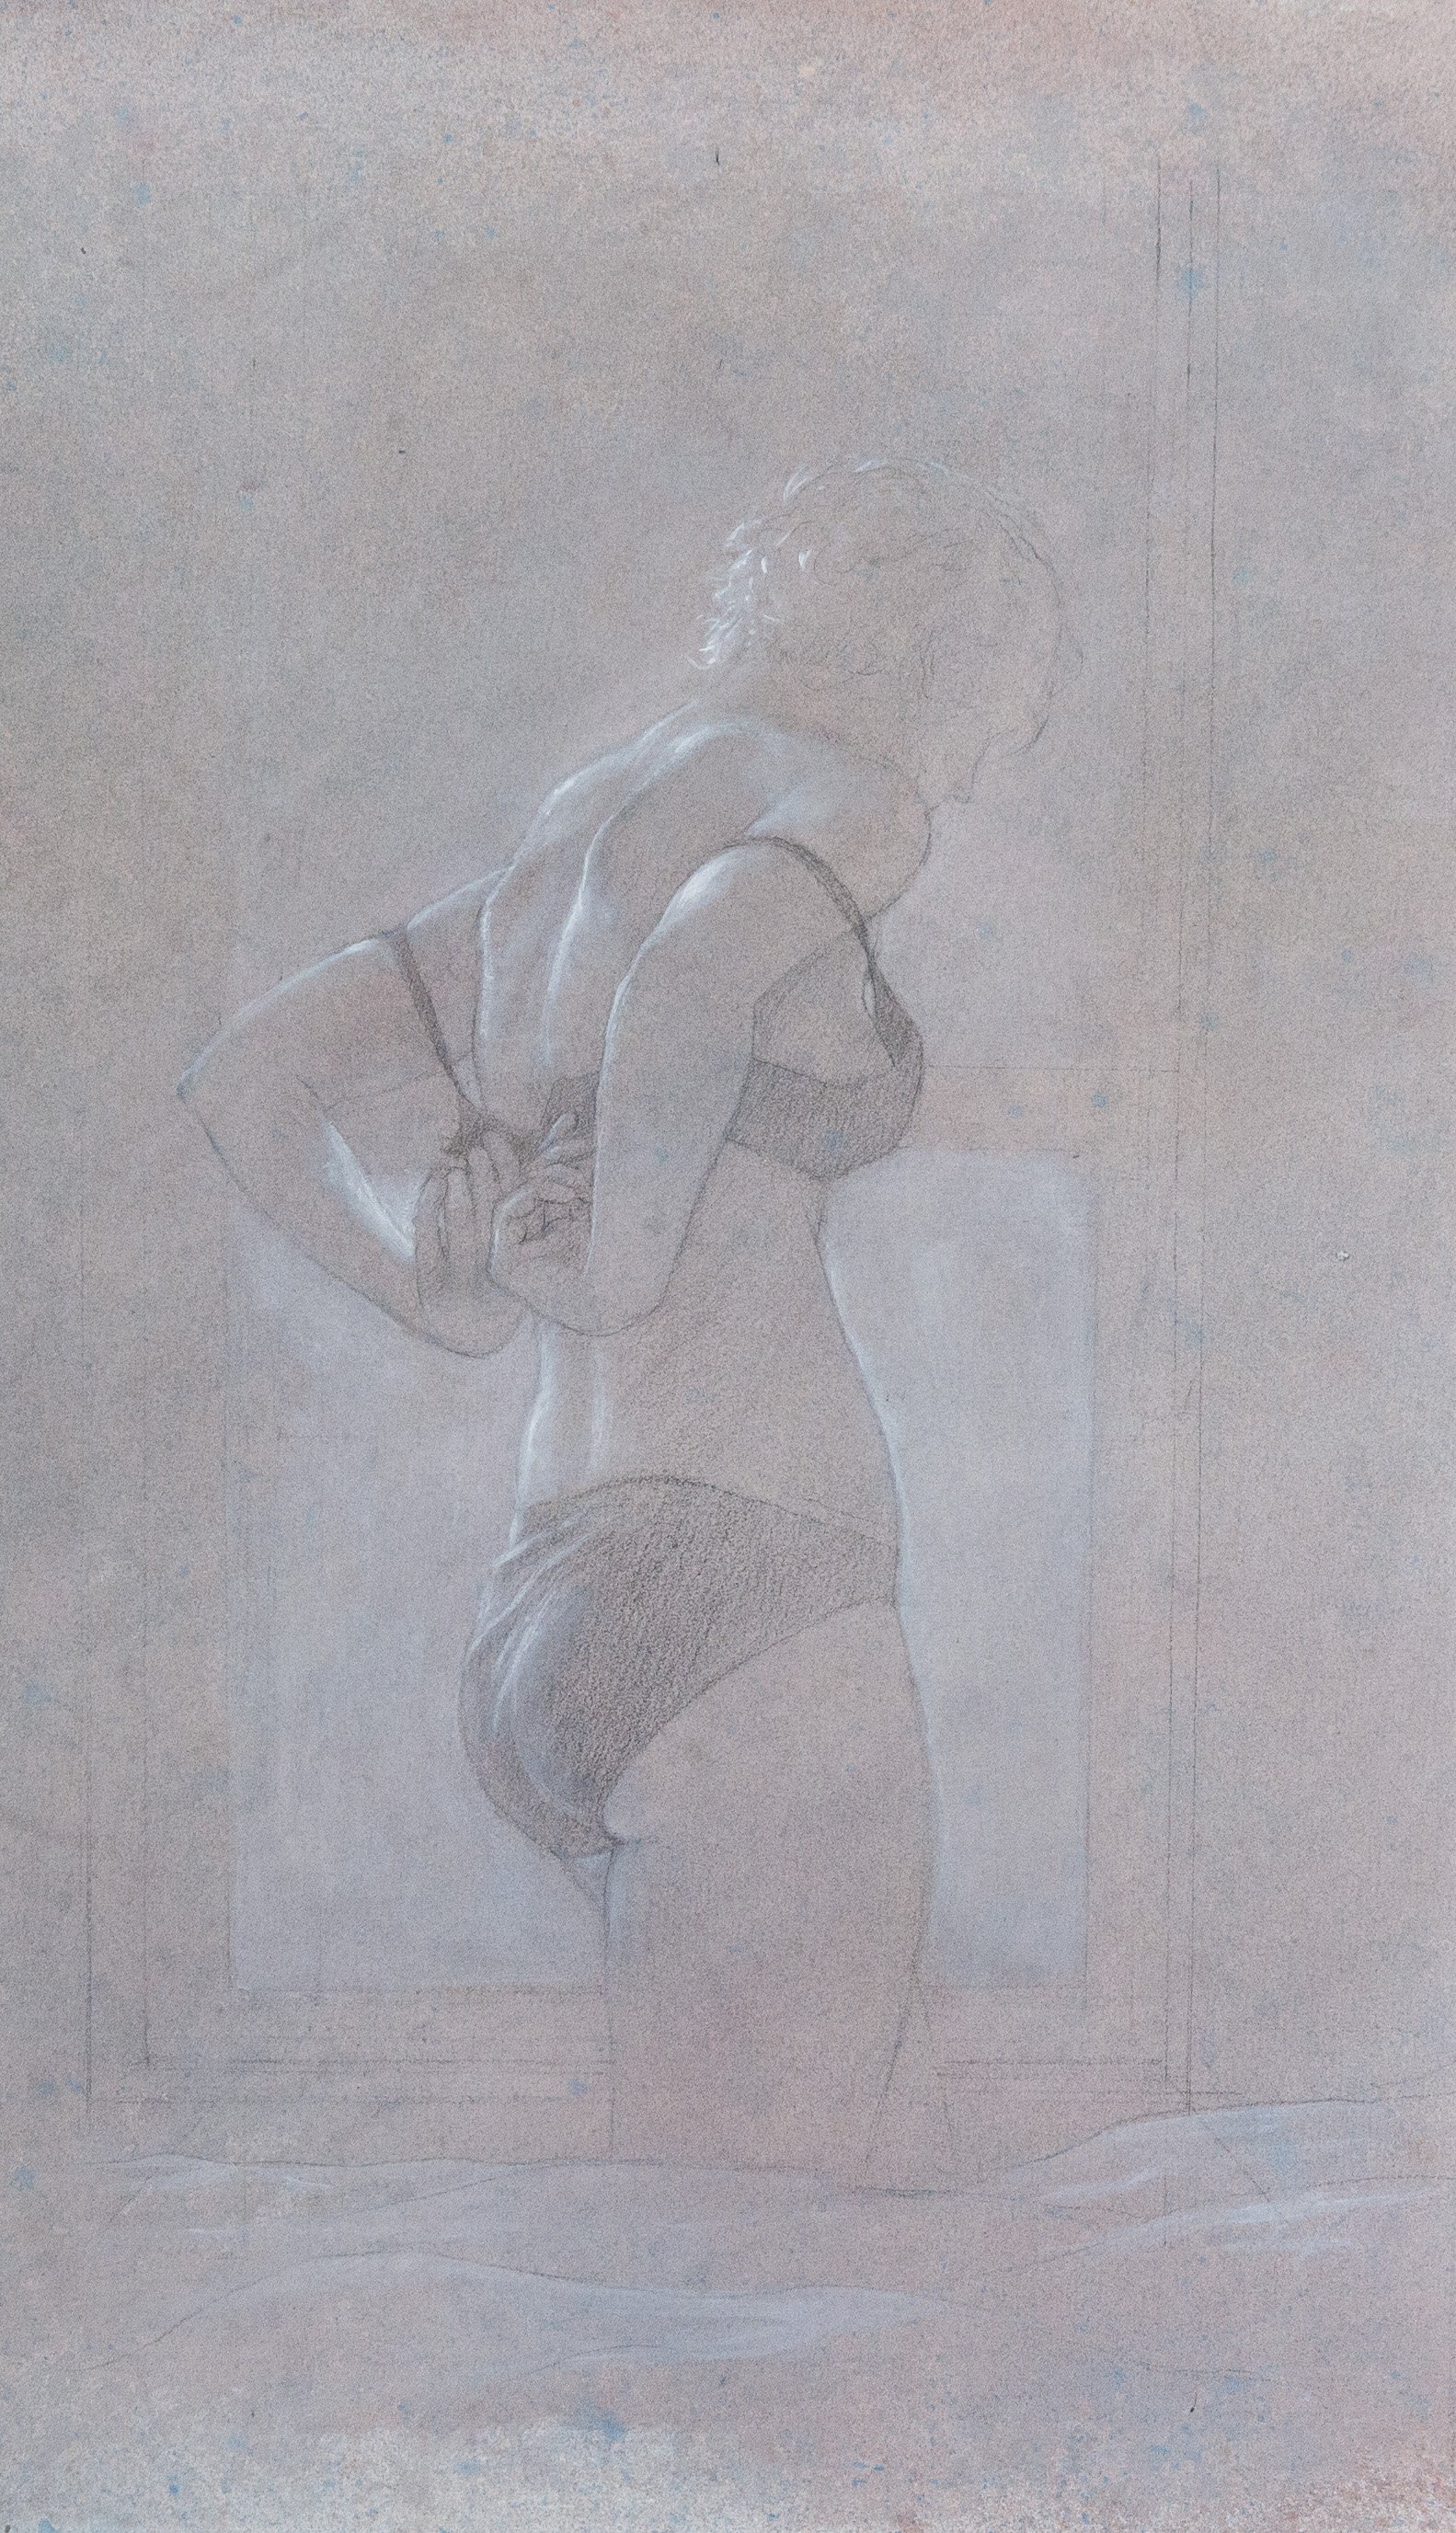 15ARGS PRESENTATIONMiguel Carter-Fisher_Undressing_Charcoal and Guache on Toned Paper_12.5x21.75_2015.jpg